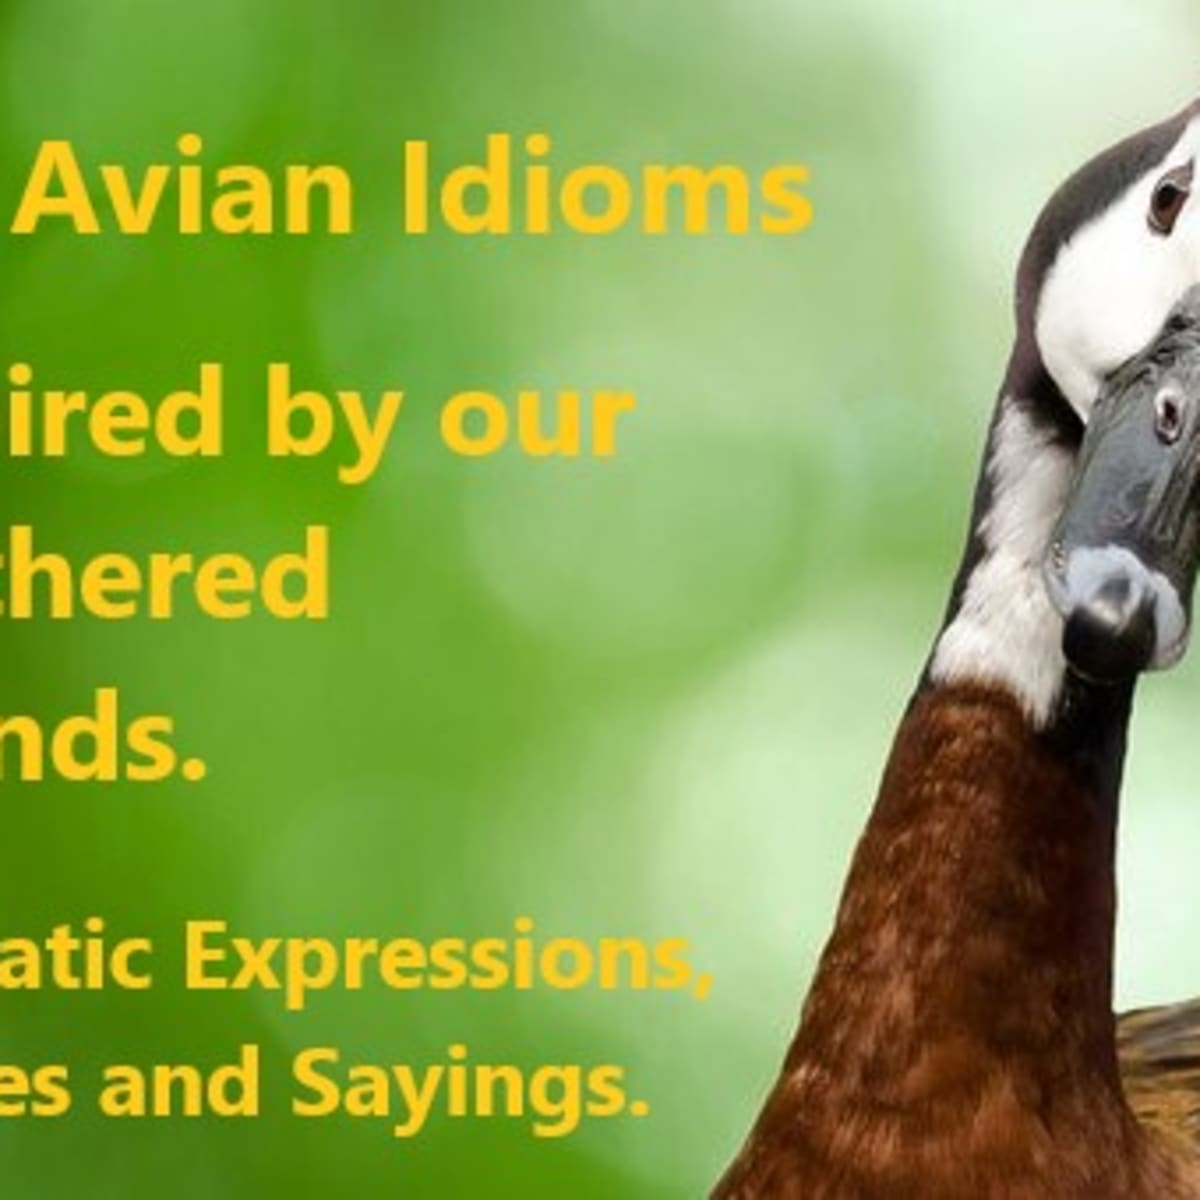 100 Everyday Avian Idioms and Phrases Inspired by Human Observation of Birds  - HubPages